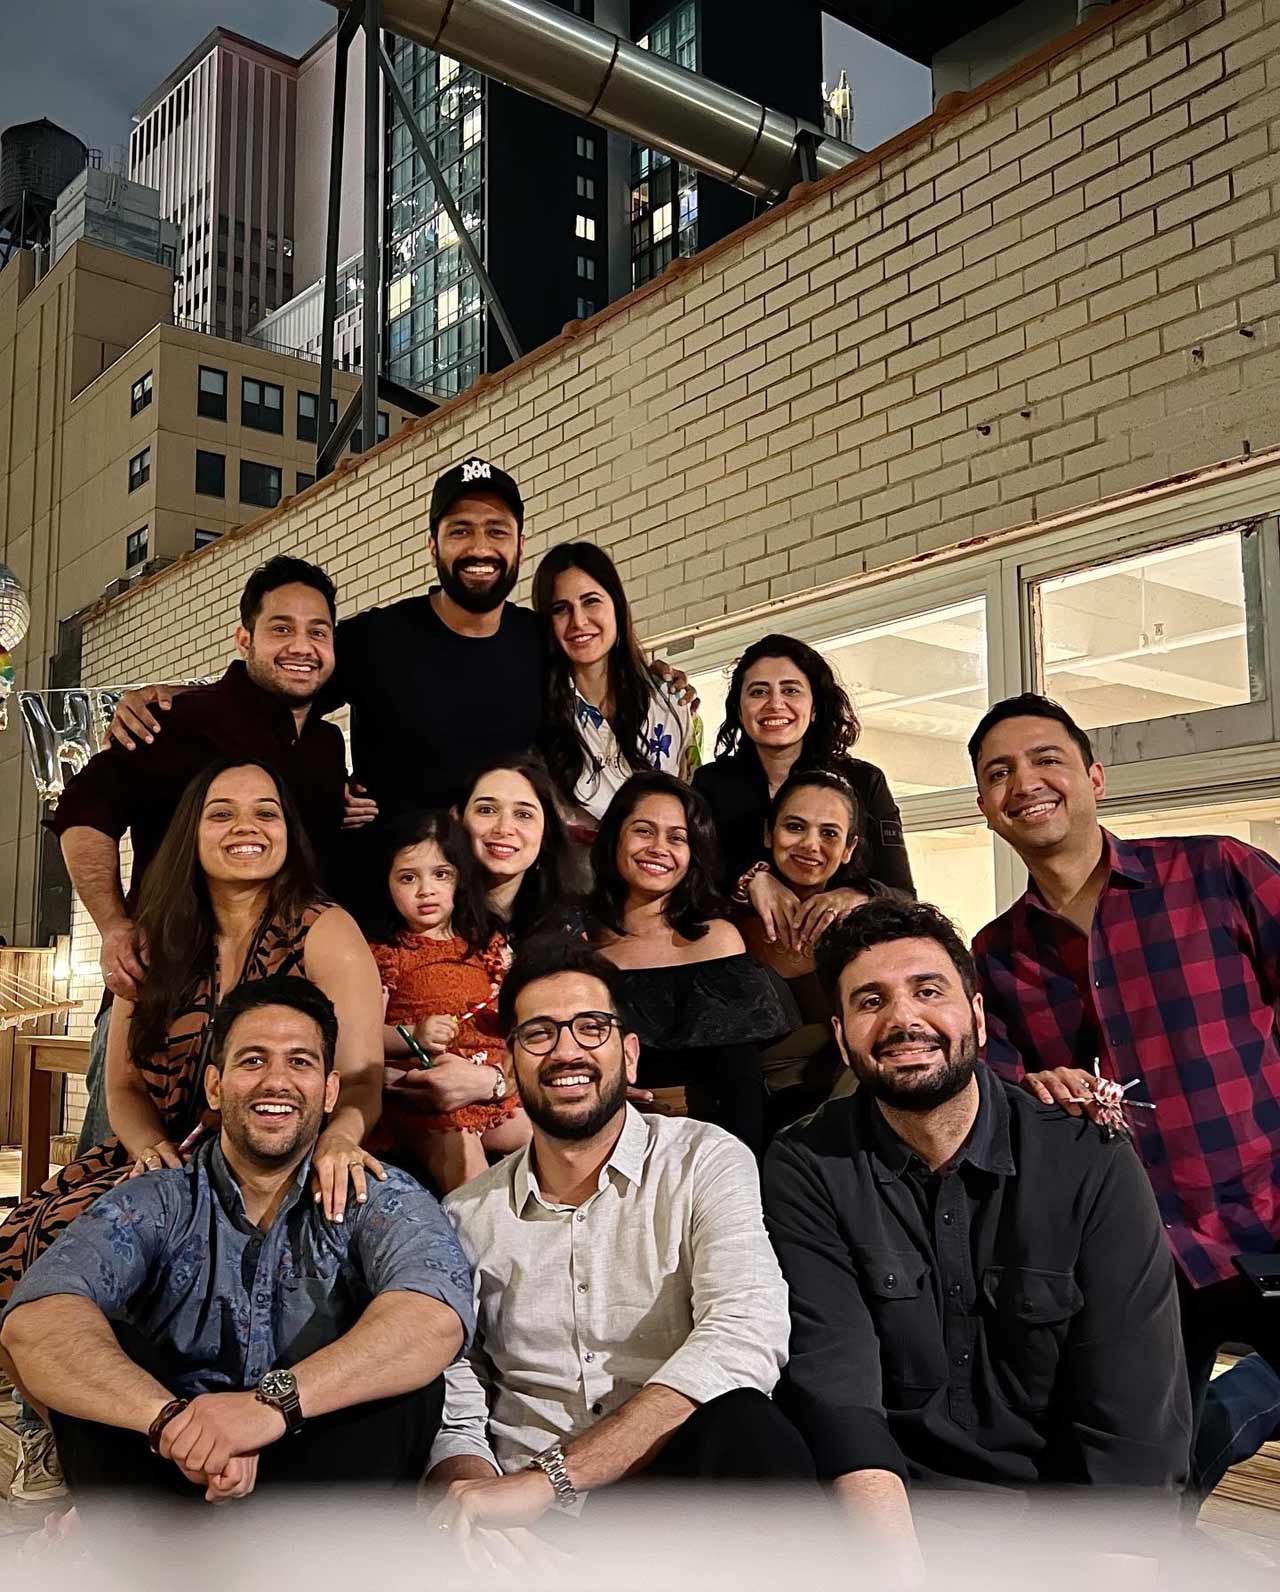 Vicky Kaushal celebrated his 34th birthday with Katrina Kaif and shared a series of pictures. One of the images had the entire birthday gang posing with the birthday boy. He wrote, 